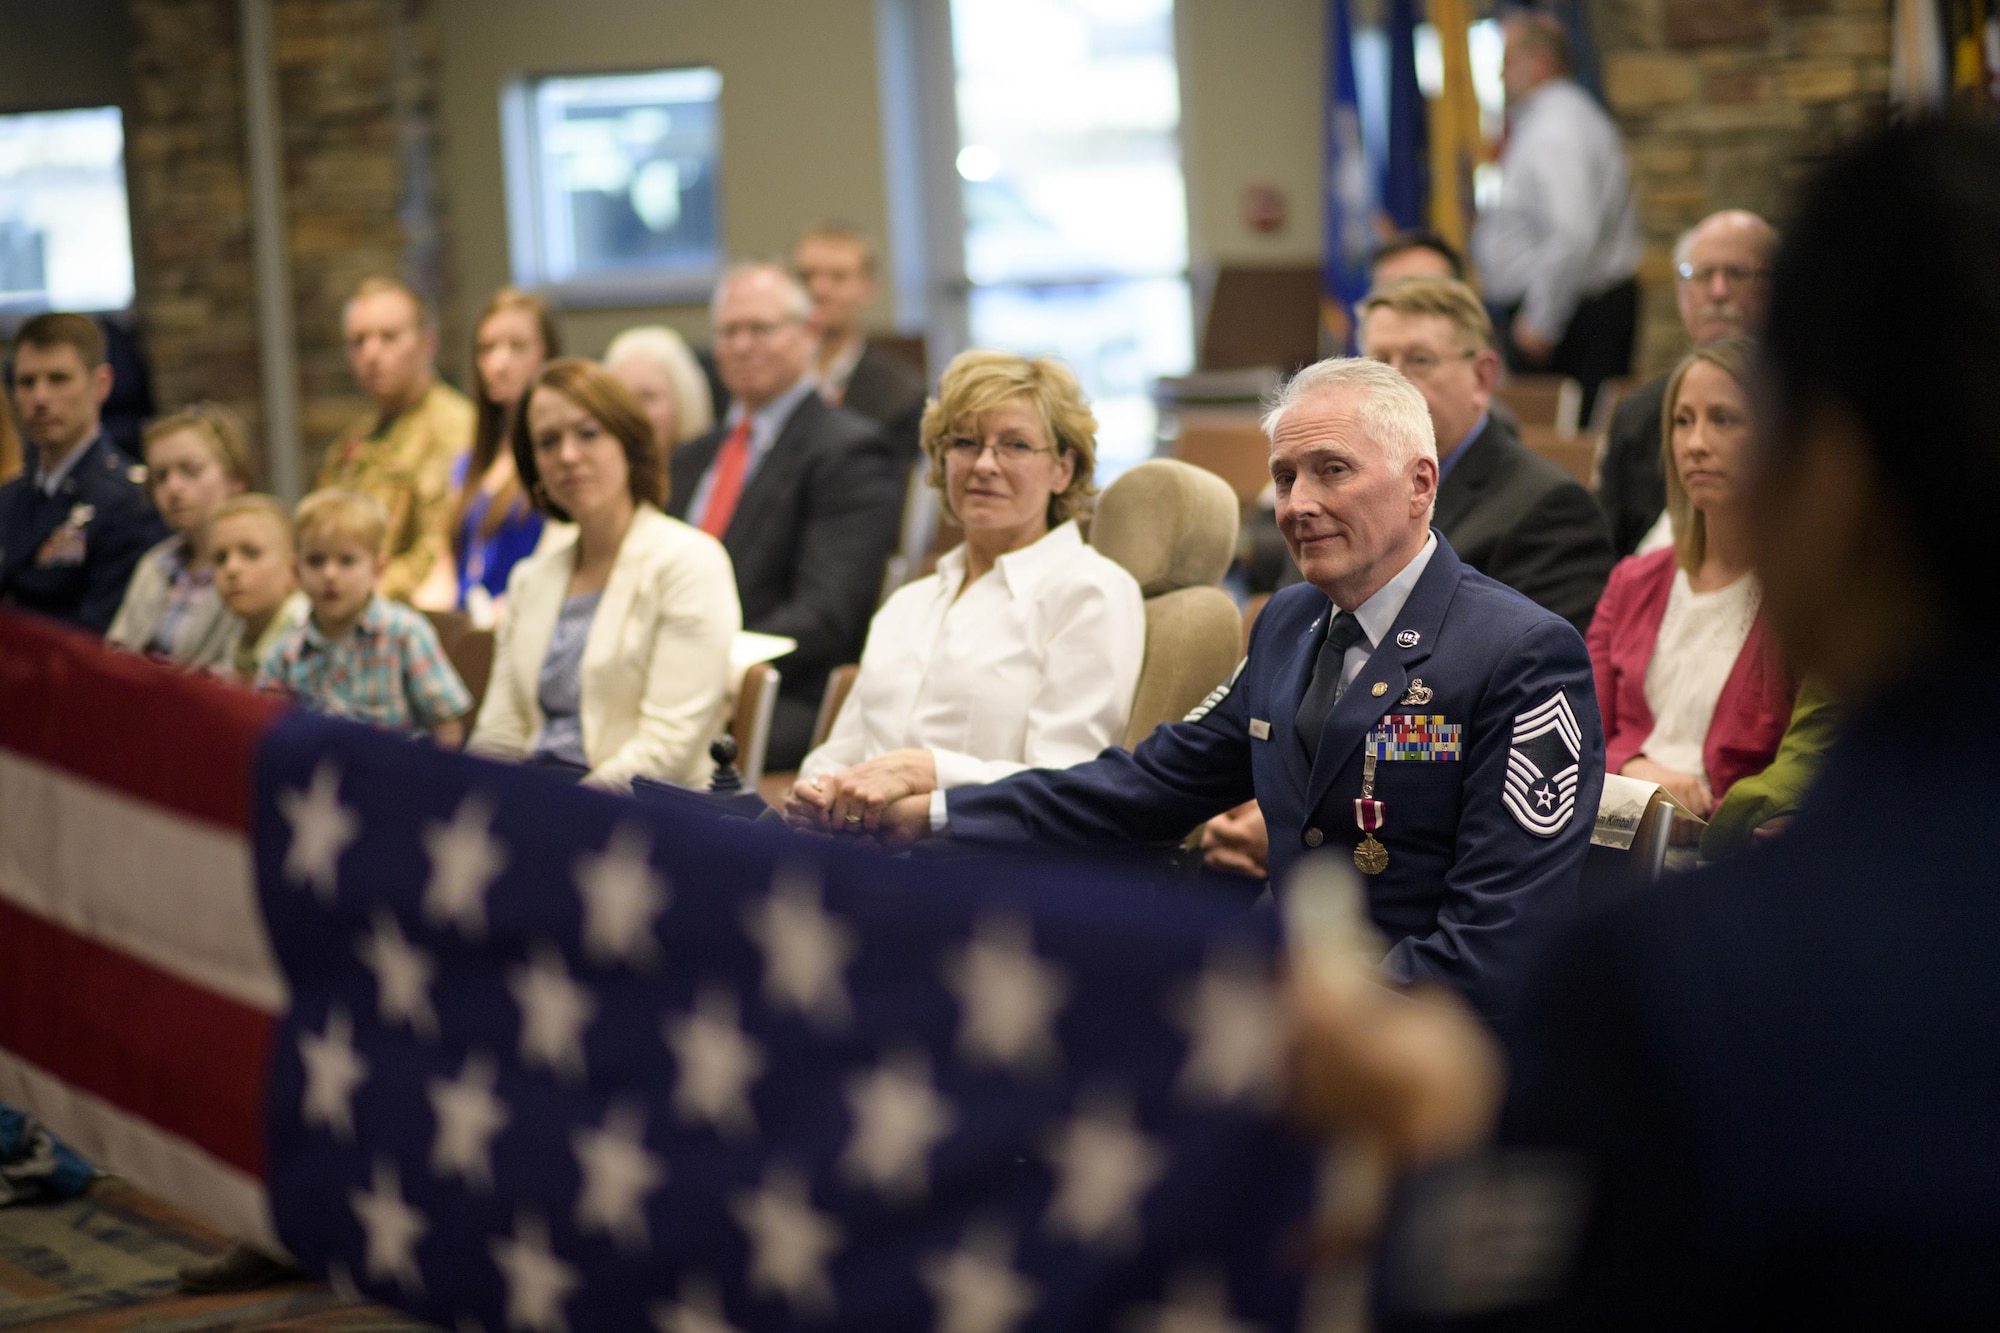 The retirement flag is folded for Chief Master Sgt. Tom Kimball Feb. 17, 2017 at Buckley Air Force Base, Co. The formal flag folding is a, Air Force tradition. (U.S. Air Force Photo/Tech. Sgt. David Salanitri)